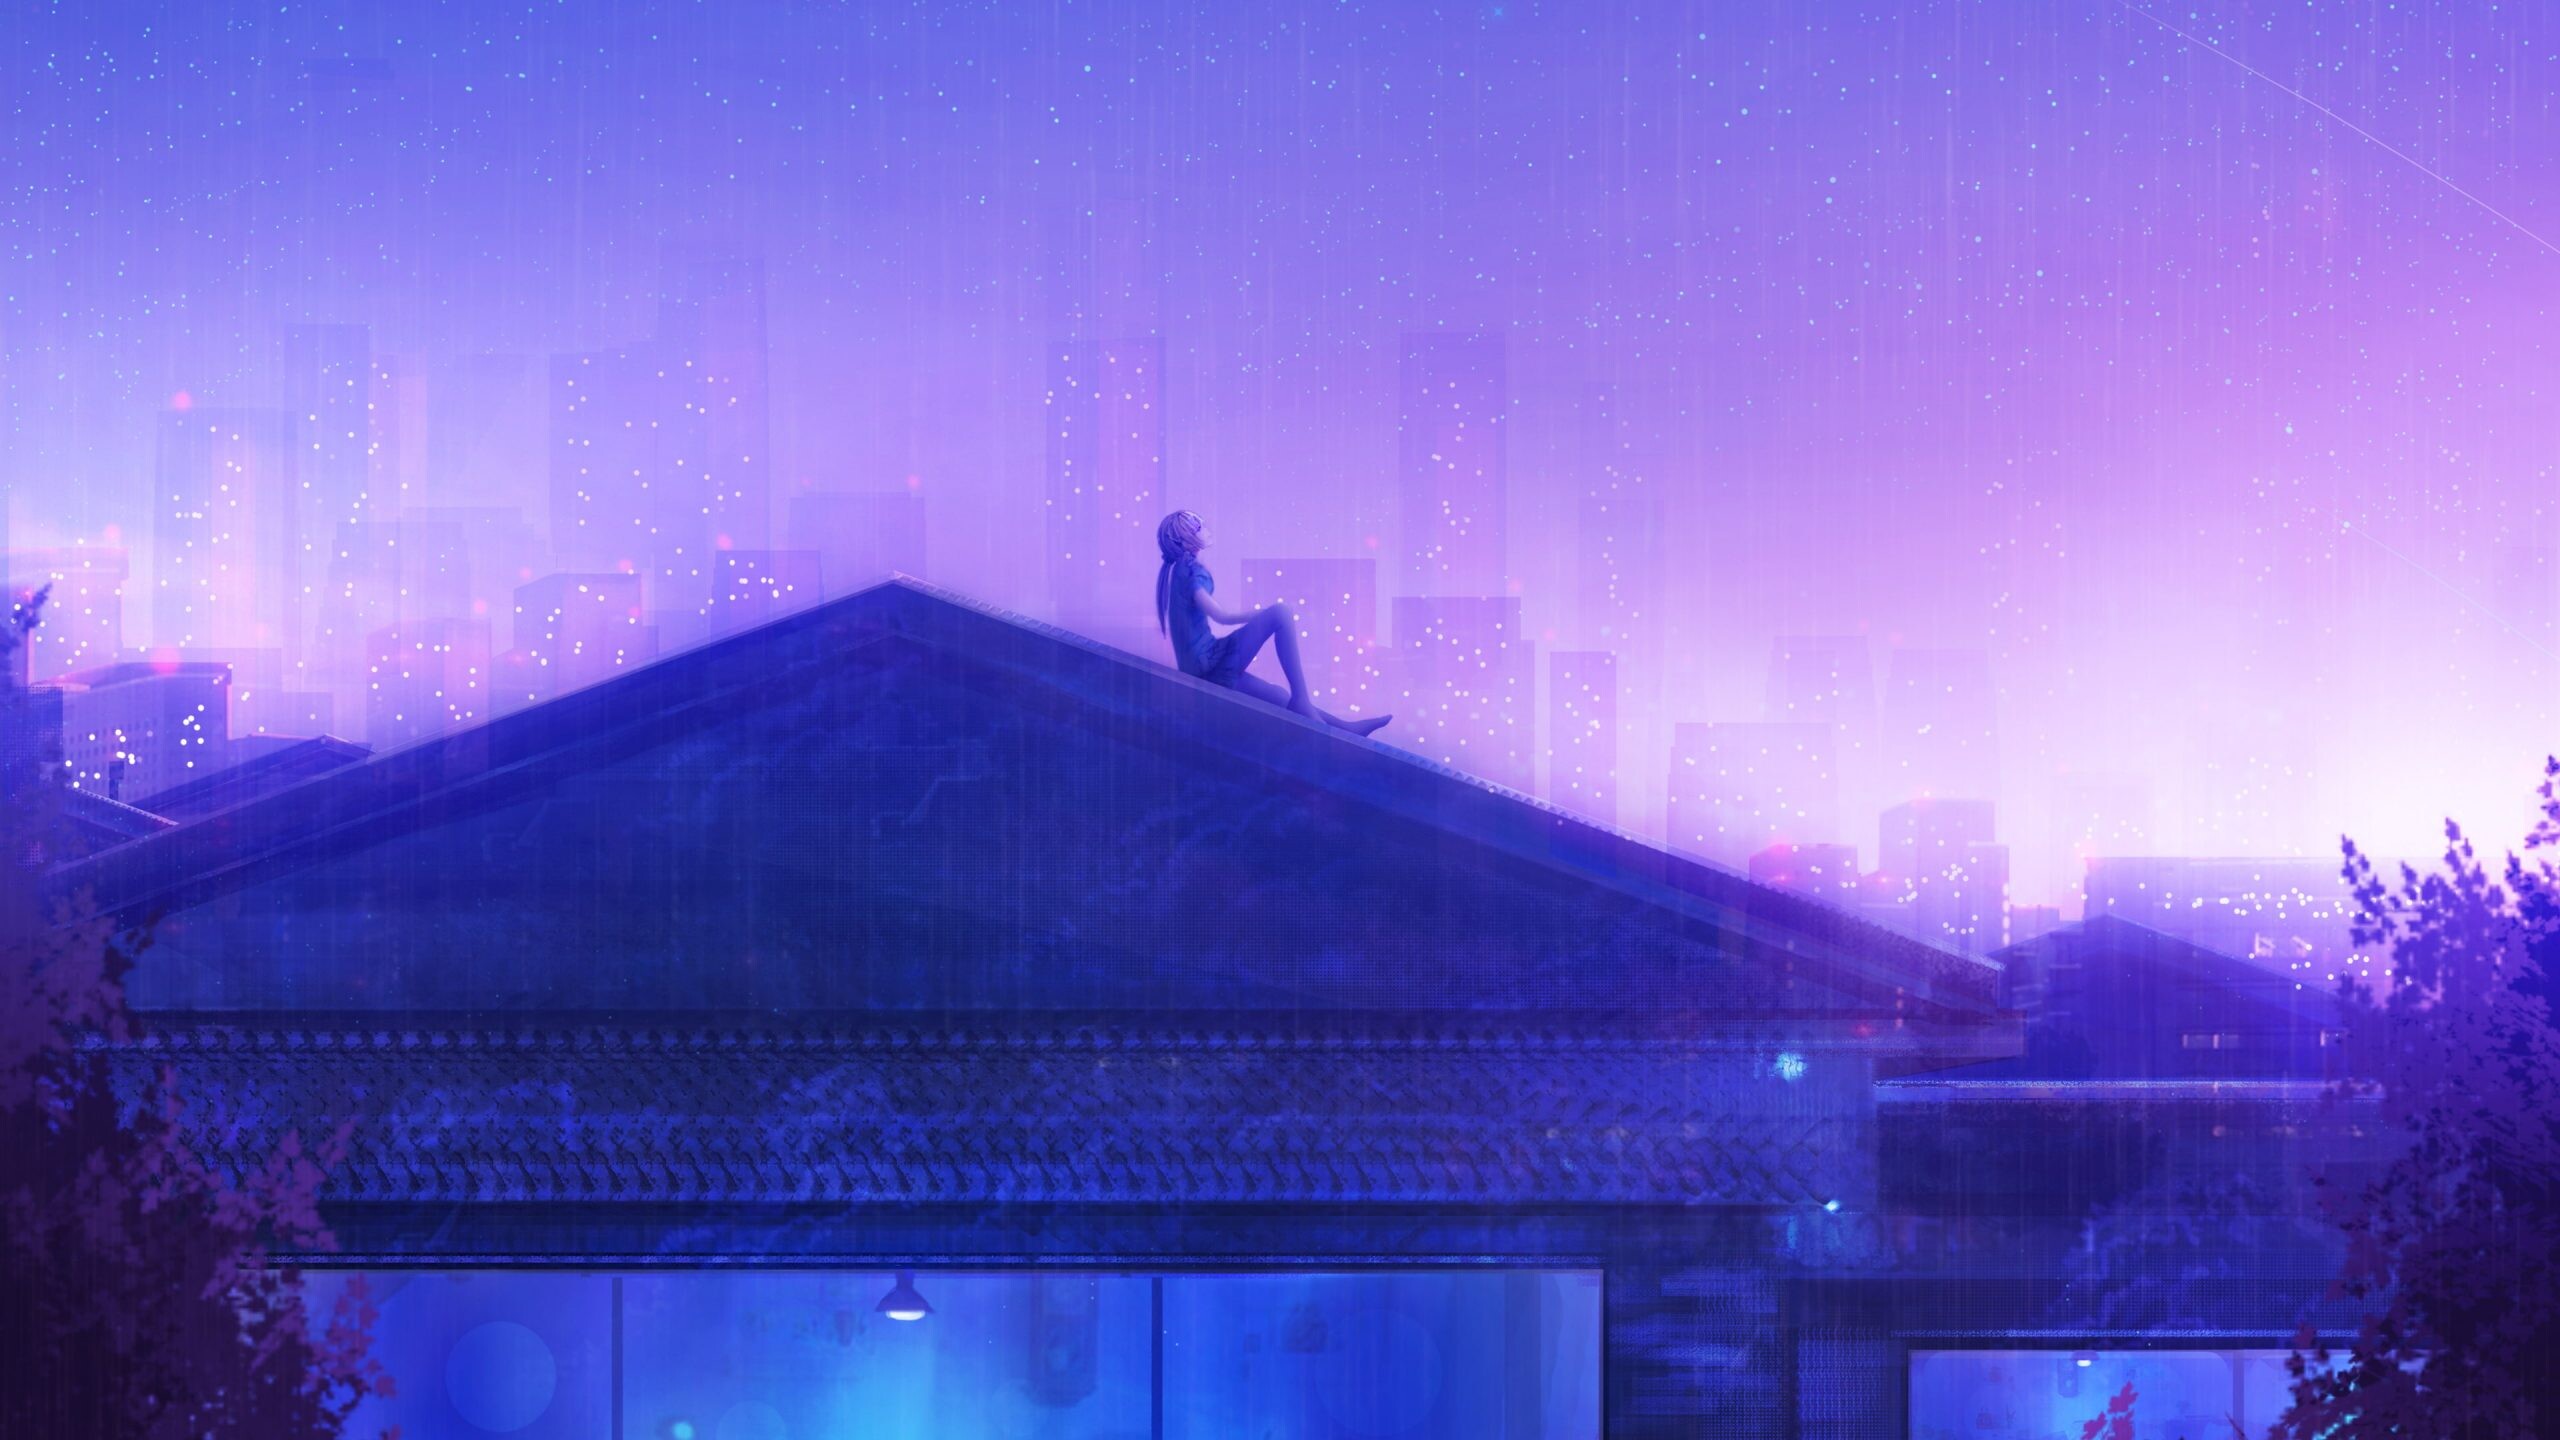 Girly: The night city view from the roof, The girl sitting and watching the stars in the night sky. 2560x1440 HD Wallpaper.